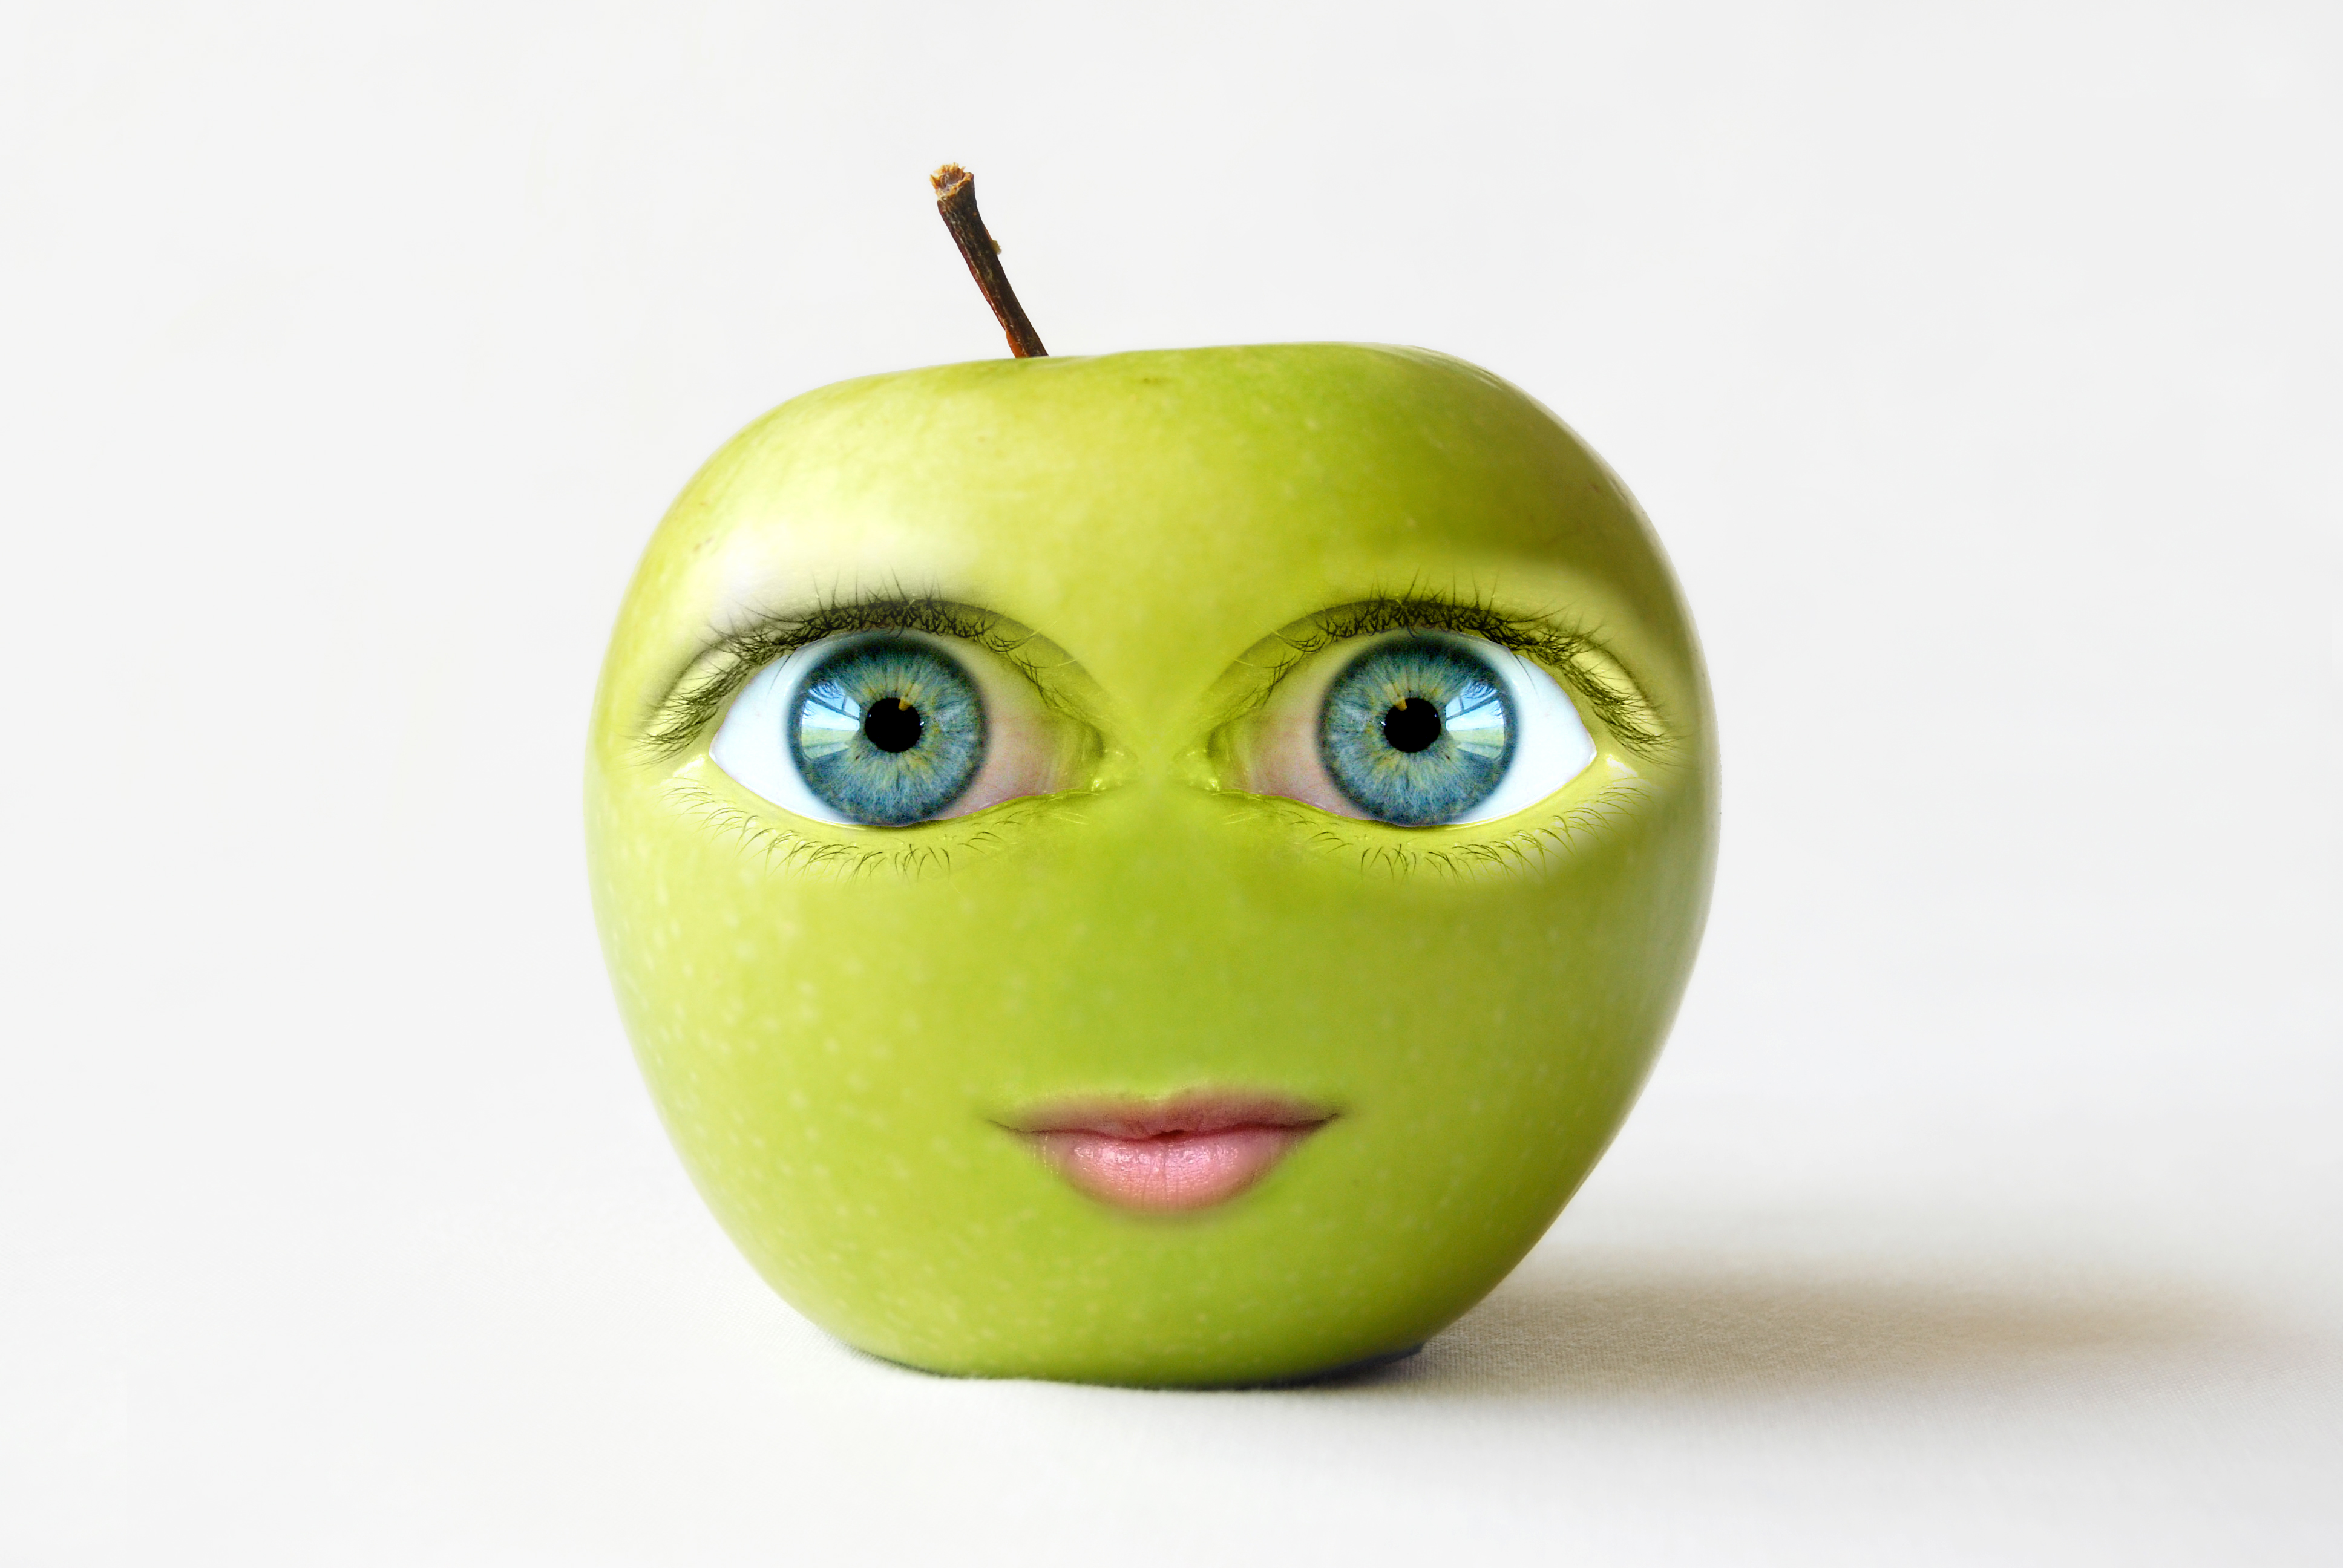 Every apple has a face